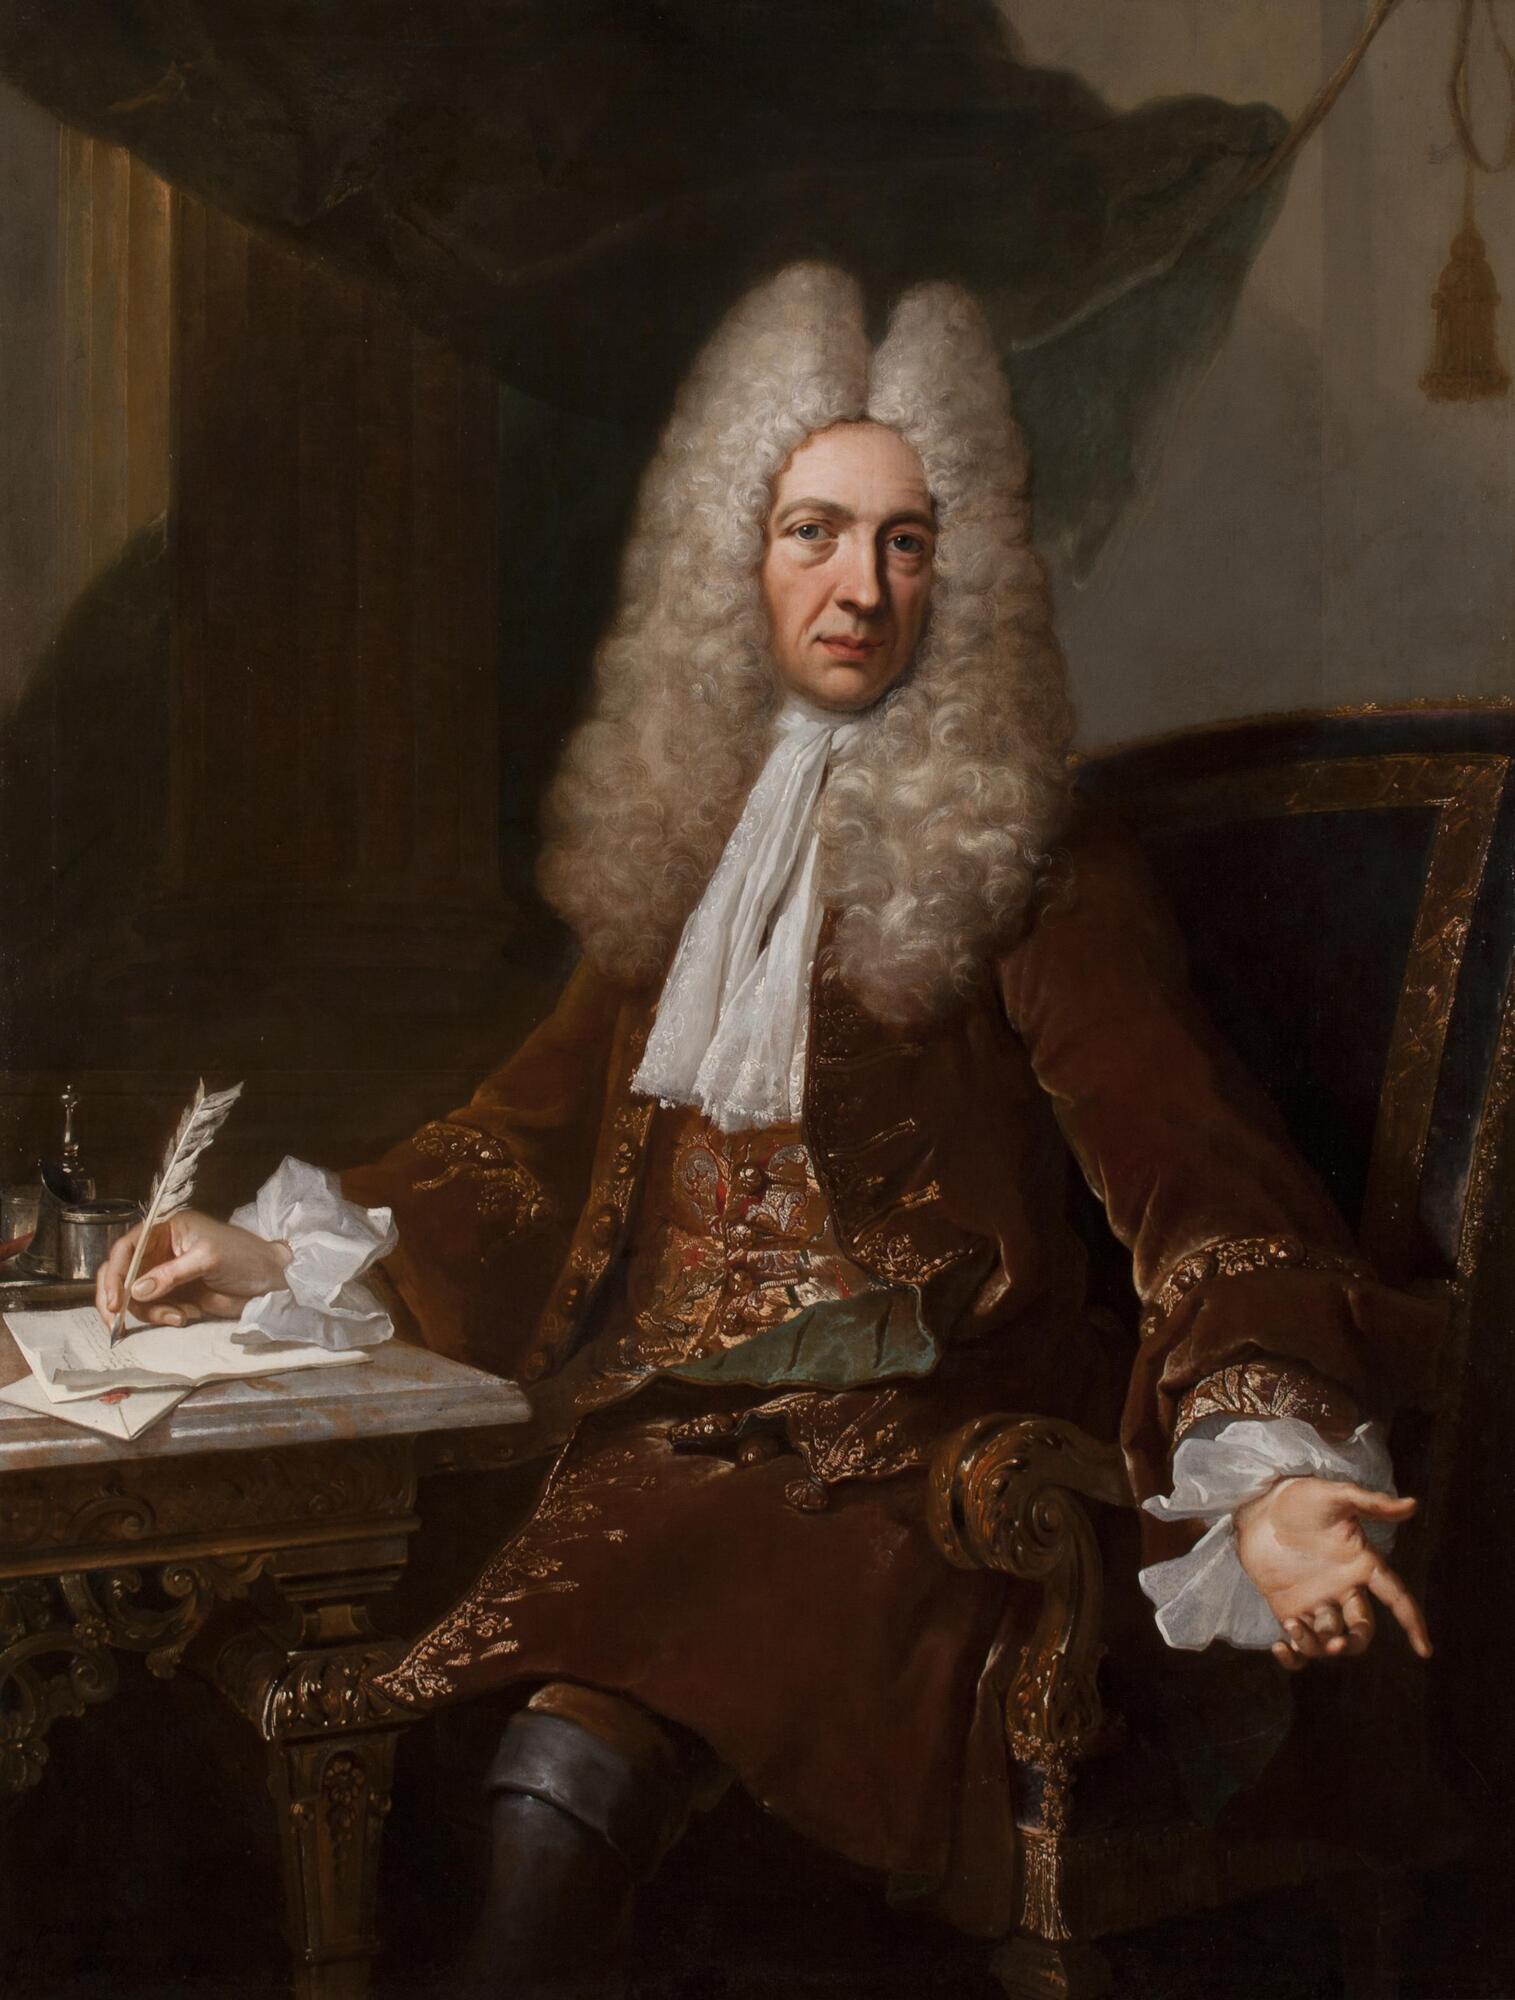 M. Bachelier is shown seated at a desk dressed in a high powdered wig and sumptous gold-embroidered velvet coat and waistcoat. Behind the figure is a rich cloth, pulled back to reveal columns. On the elaborately carved desk are papers and a writing set. M. Bachelier extends his left hand towards the viewer, suggesting that we have interepted him while writing at his des. The painting&#39;s coloring consists of rich burgundy red, green, tan and gold.